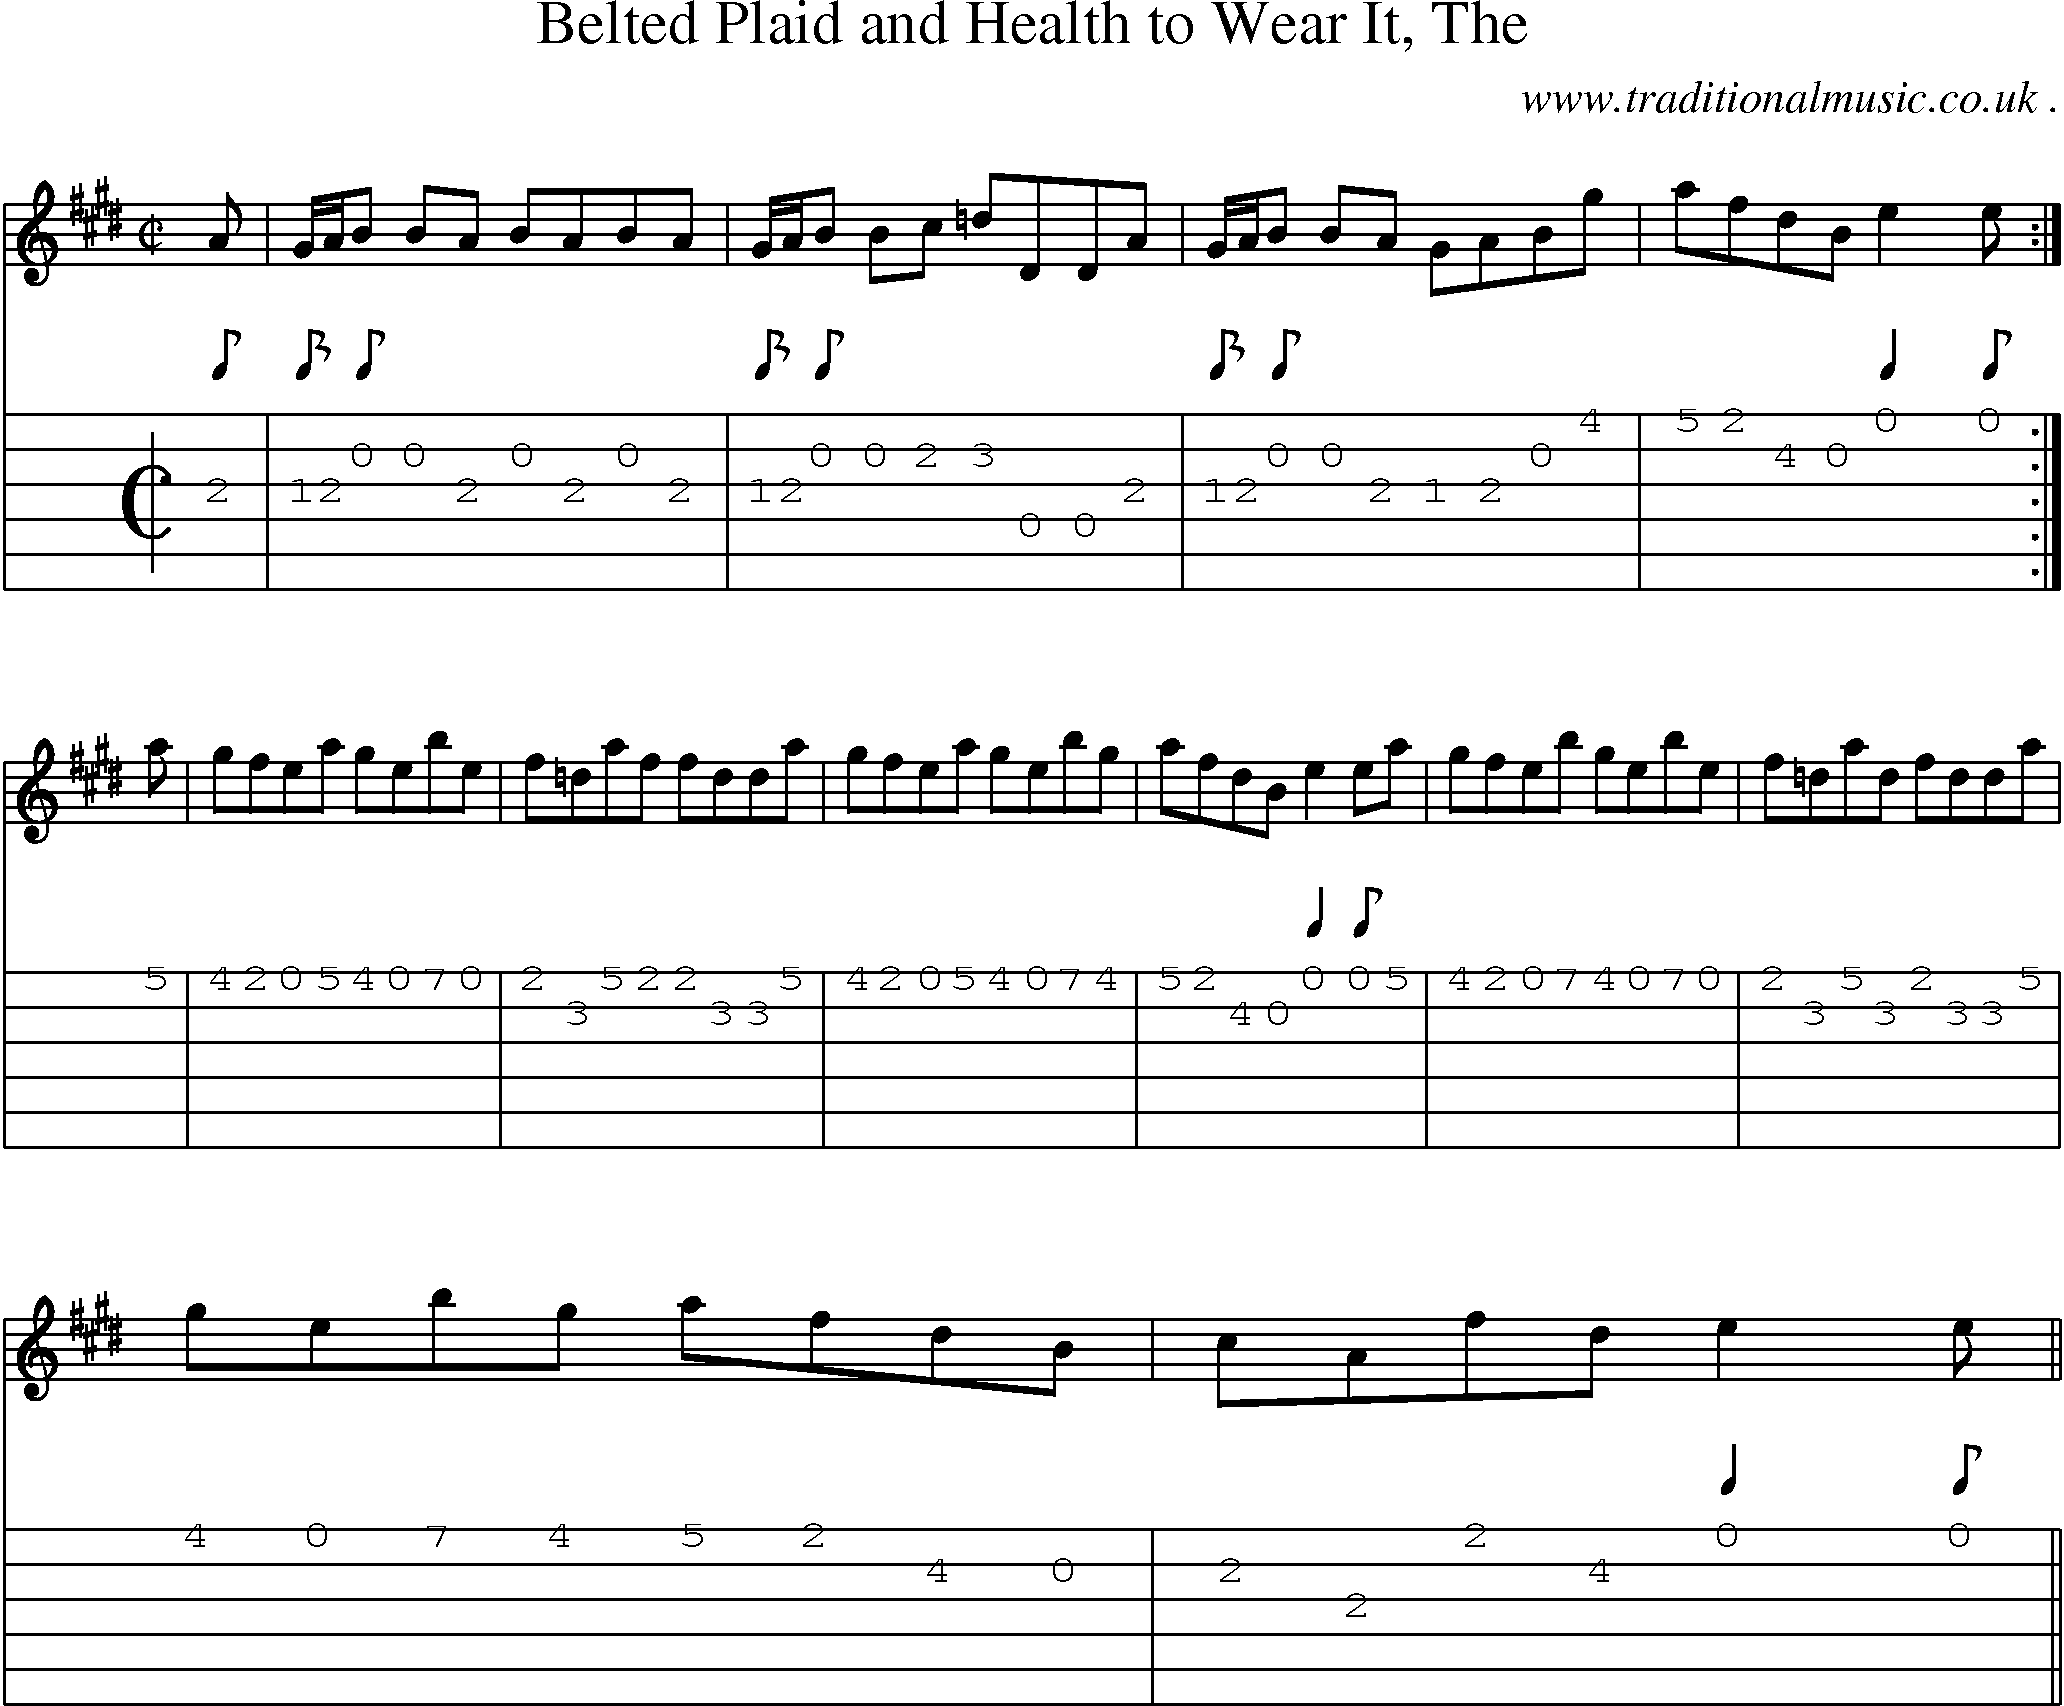 Sheet-music  score, Chords and Guitar Tabs for Belted Plaid And Health To Wear It The